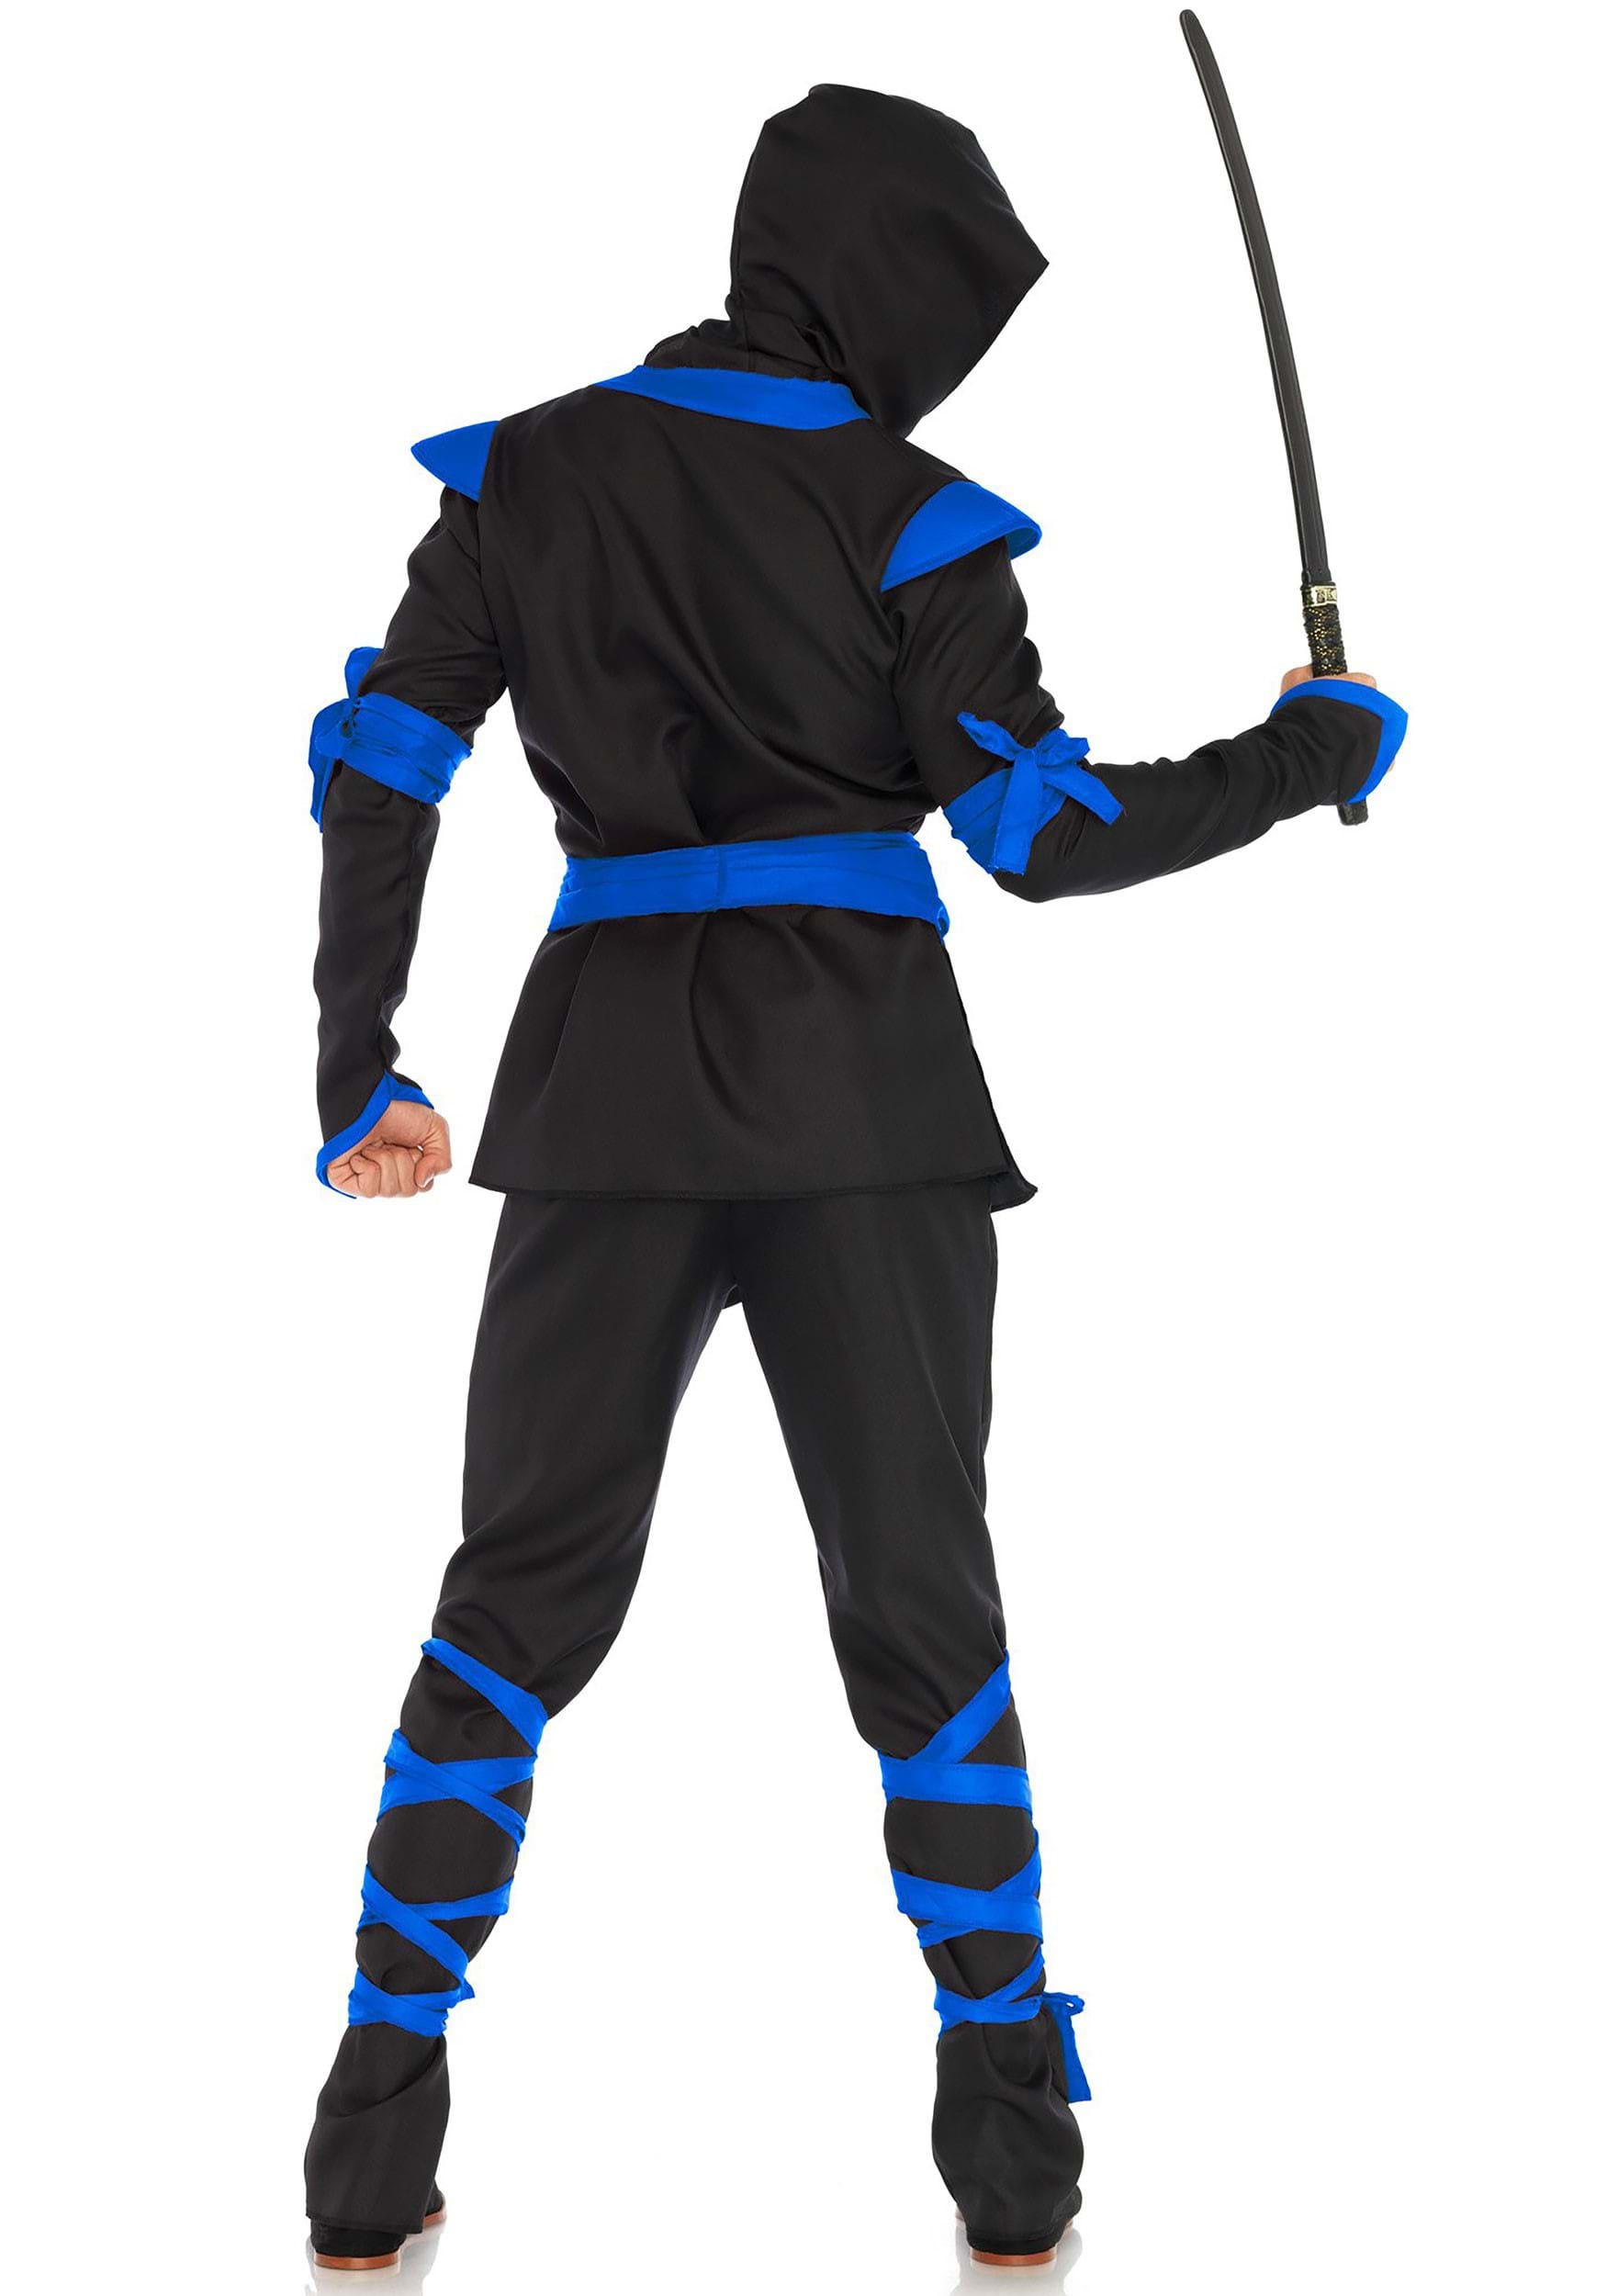 Blue Ninja Suit Bodysuit Cosplay Costume with Mask and Gloves for Halloween